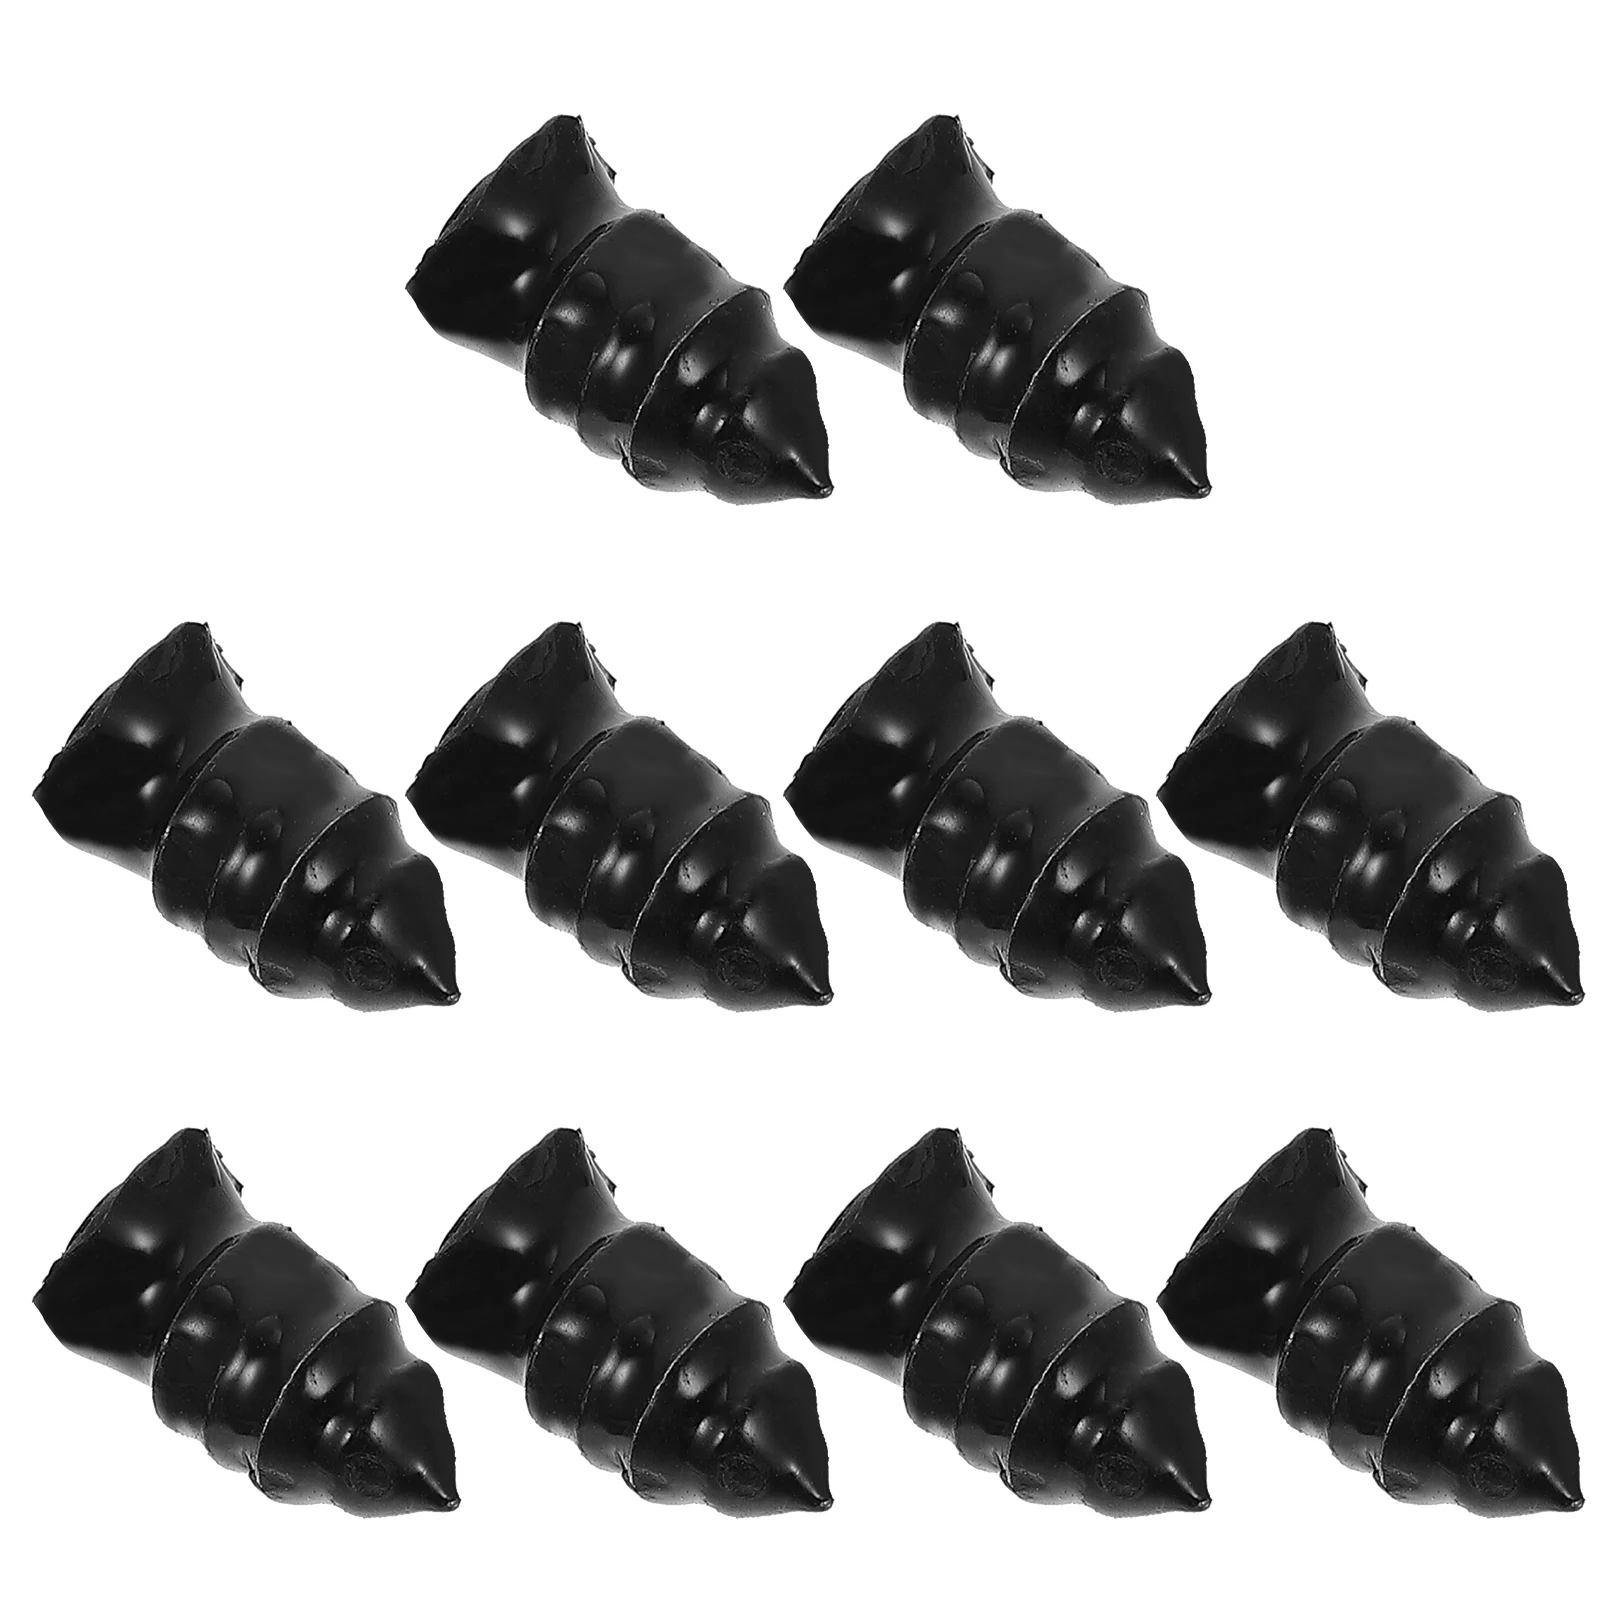 

Tire Repair Screw Nail Car Tires Studs Rubber Wheel Self Tyre Stud Kit Anti Skid Screws Tractor Puncture Motorcycle Auto Spikes